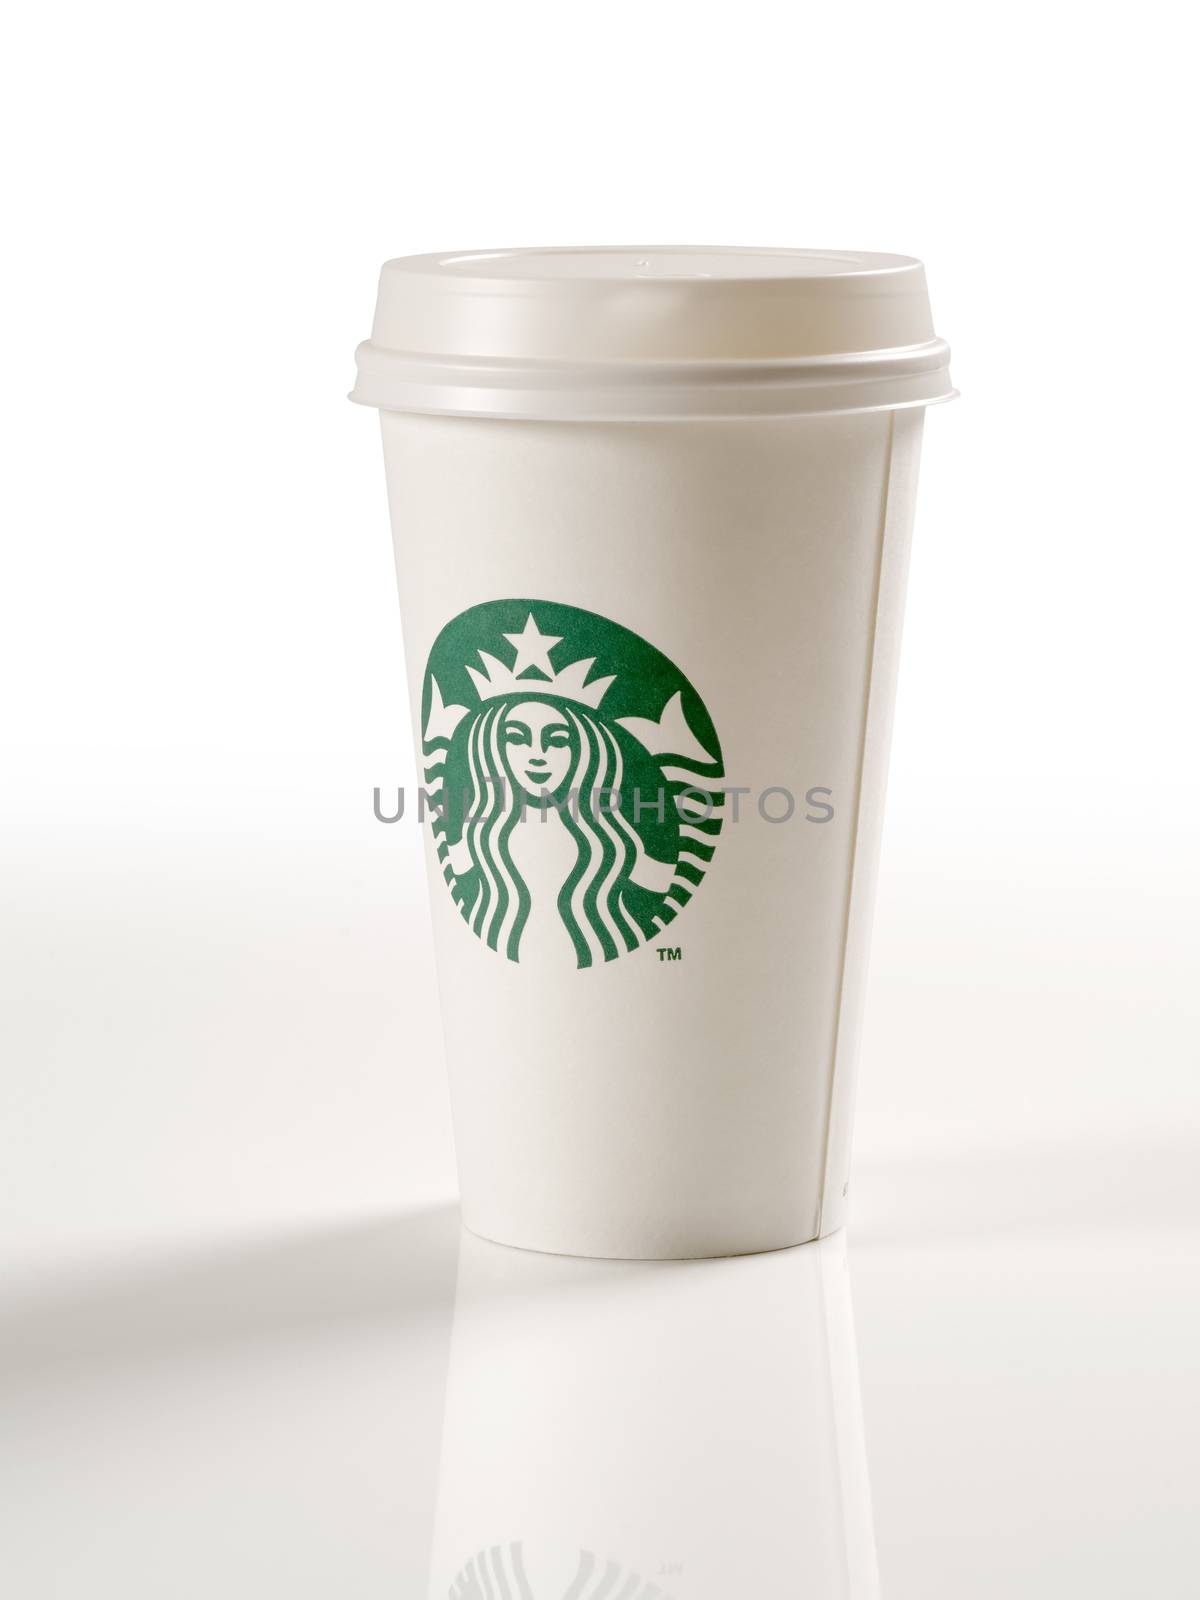 Starbucks paper cup by sumners